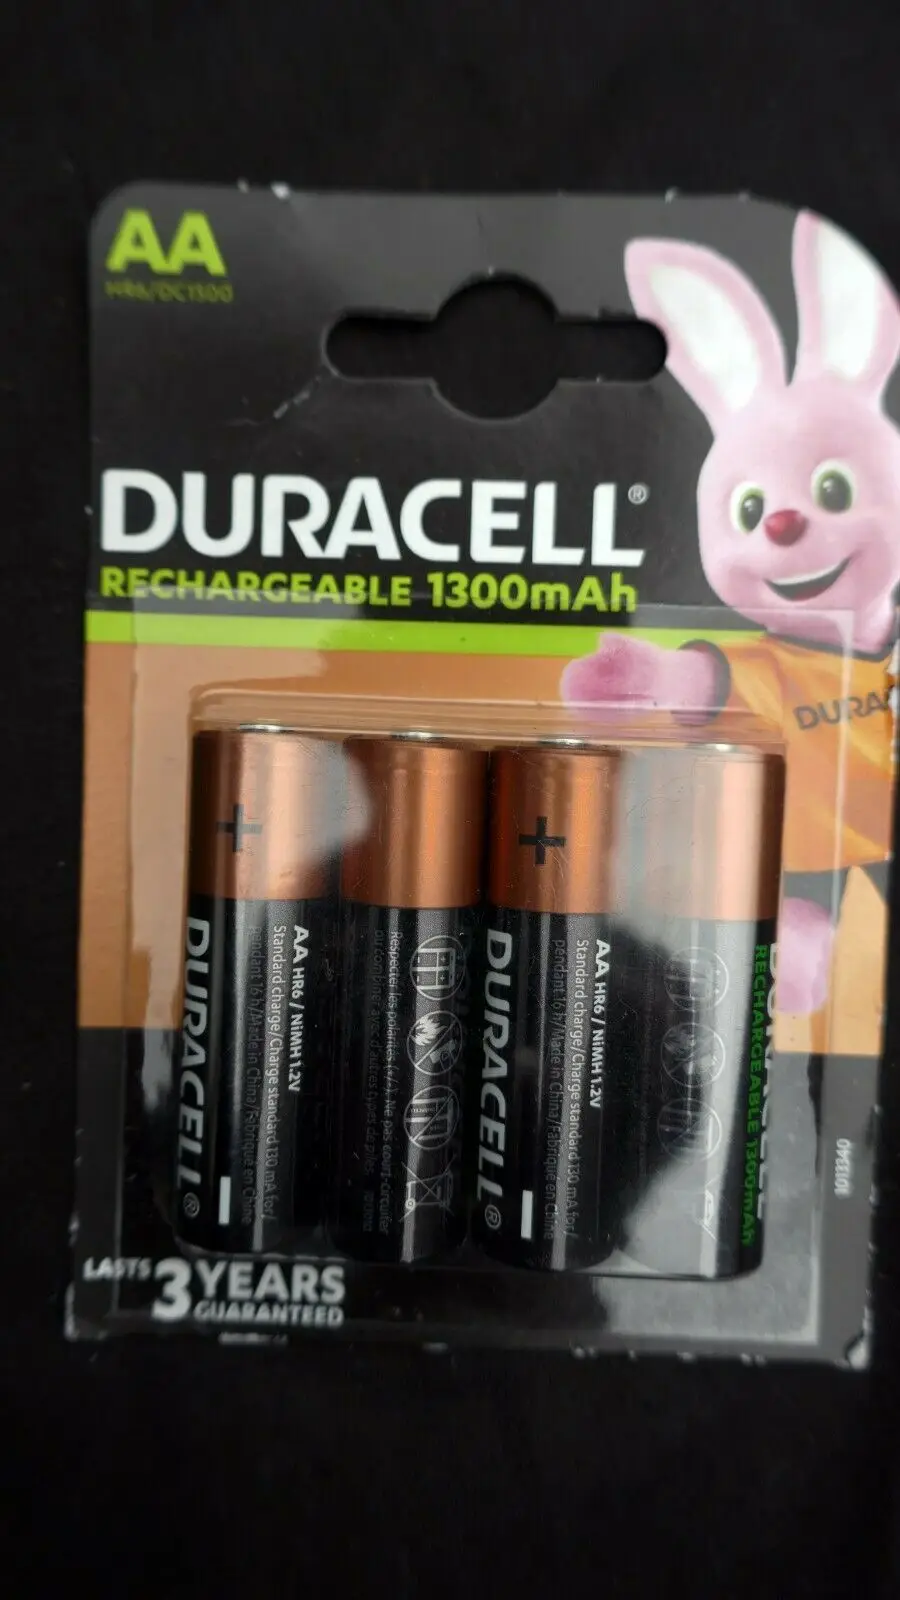 

Duracell AA 1300 mAh Rechargeable Batteries - Pack of 4